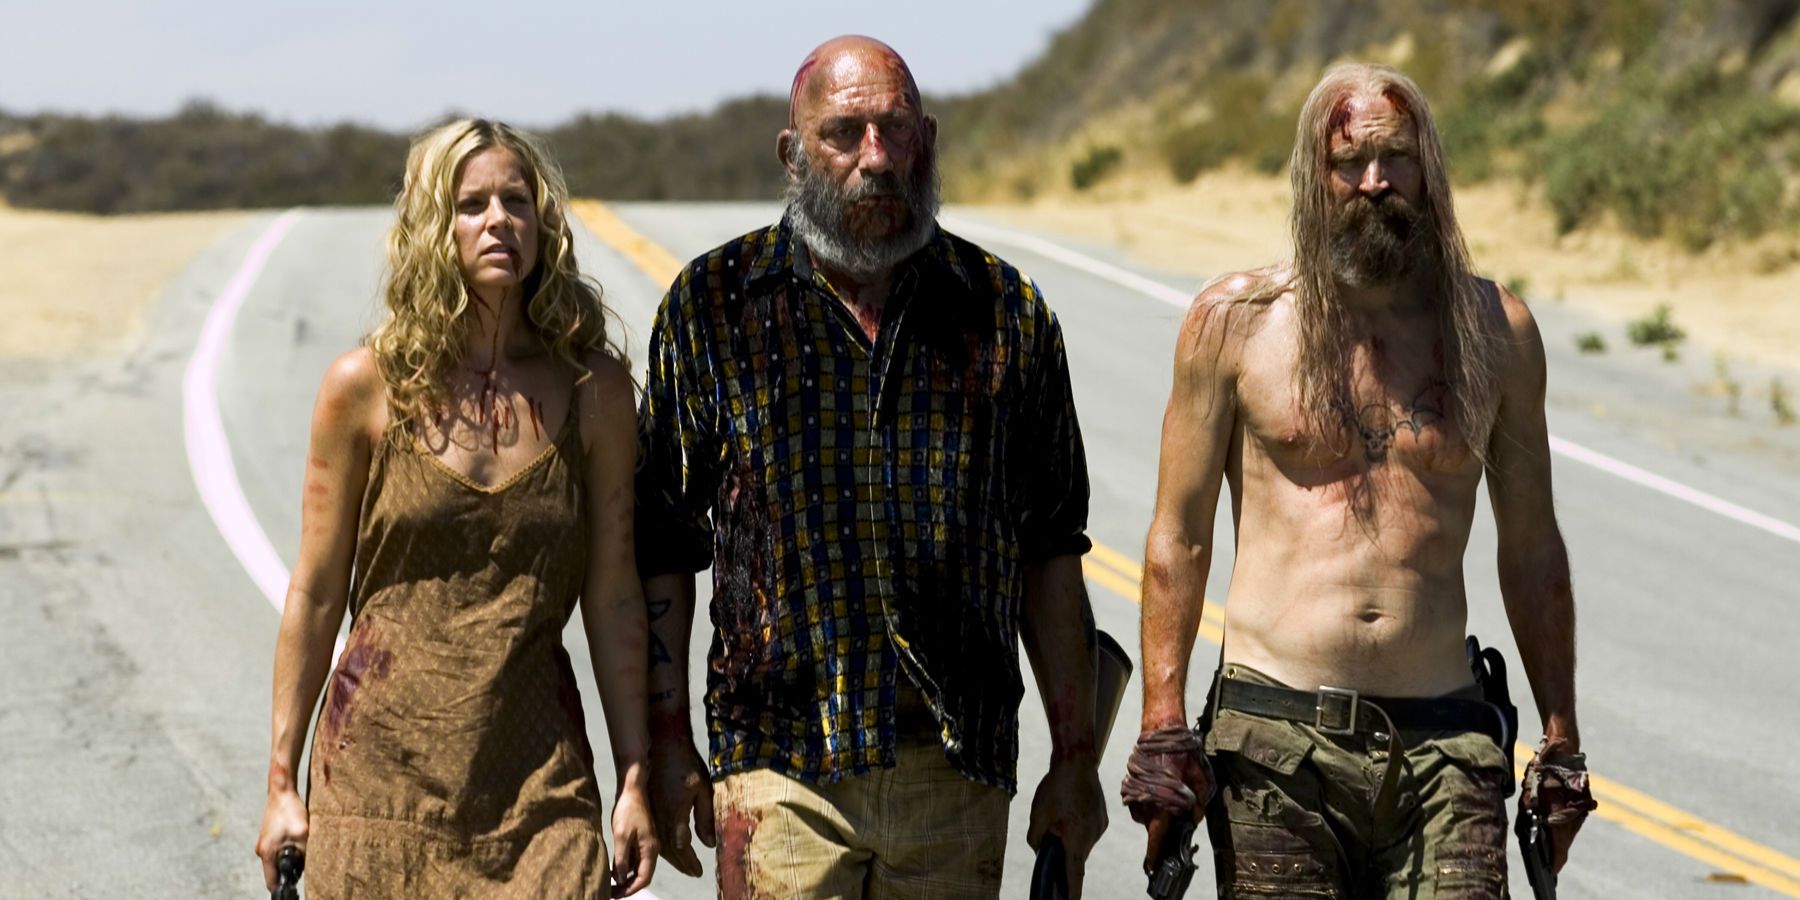 Devil's Rejects - Moon, Haig, and Moseley